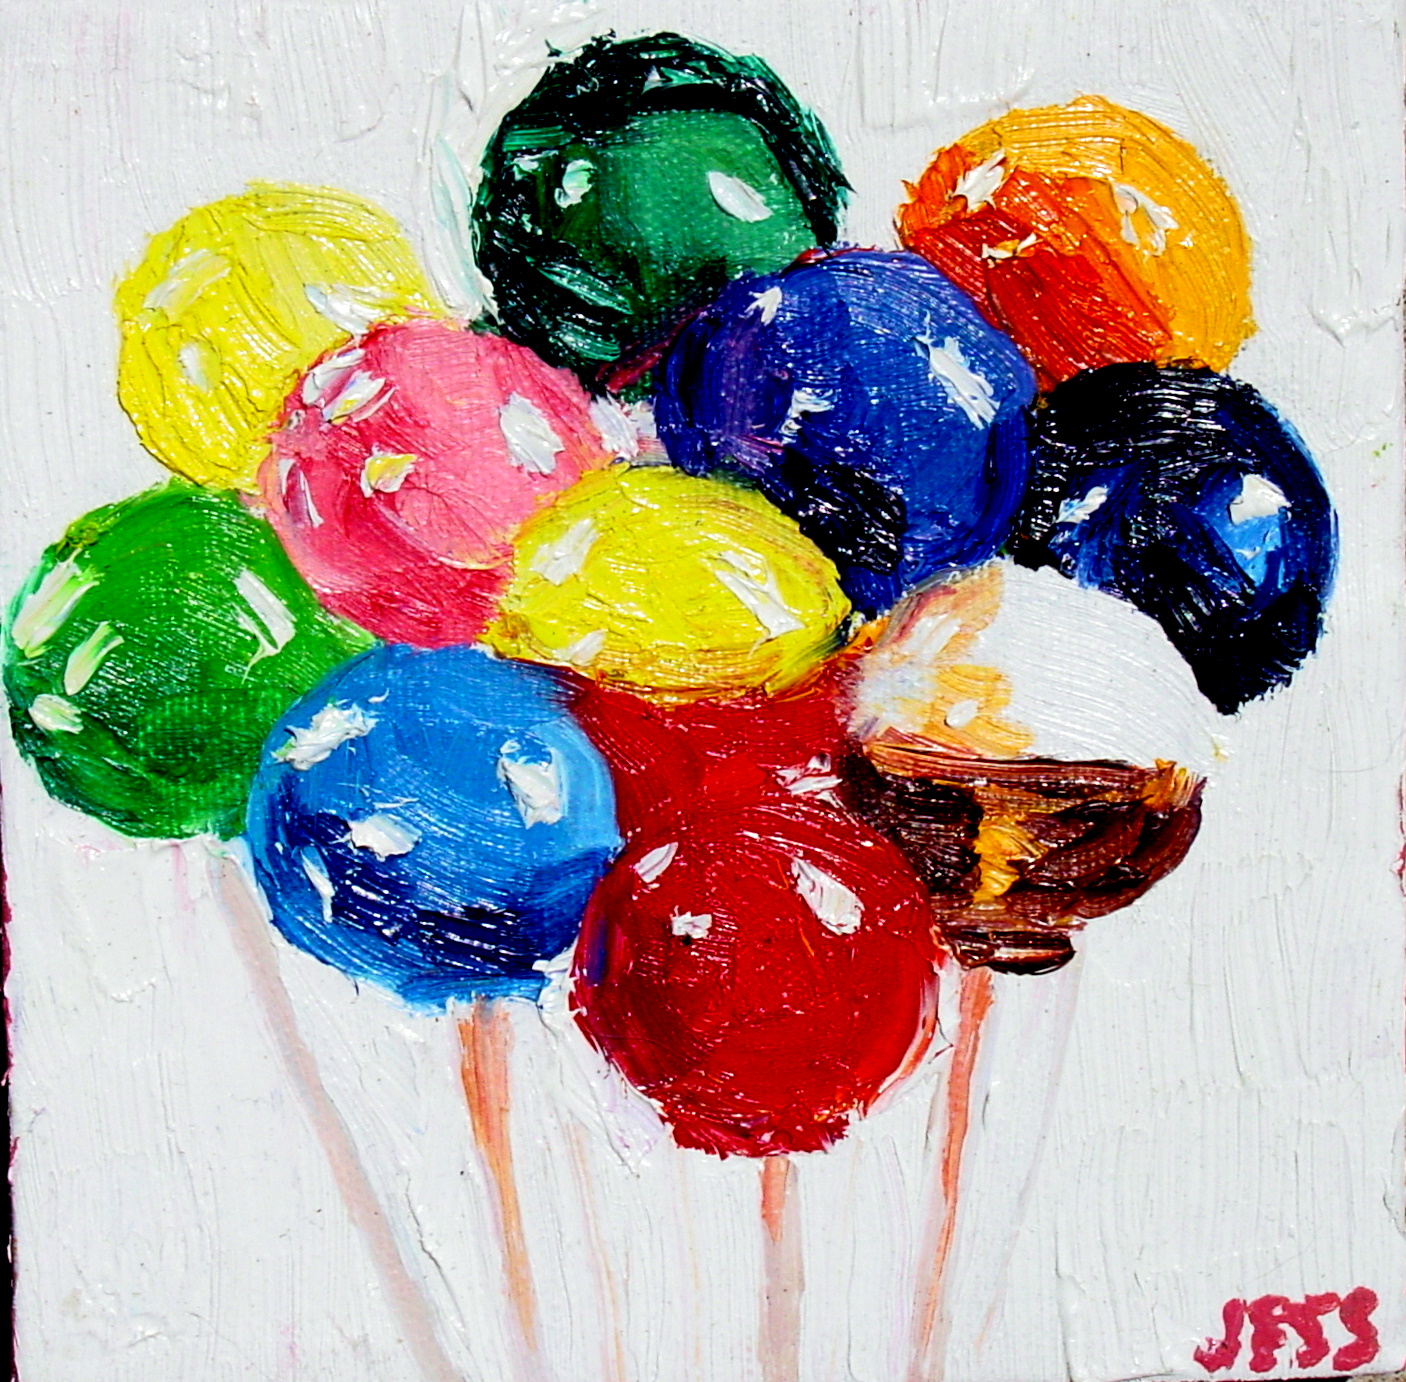 Yum Eight Delicious Oil Paintings 6x6'' Jessica Siemens 2009